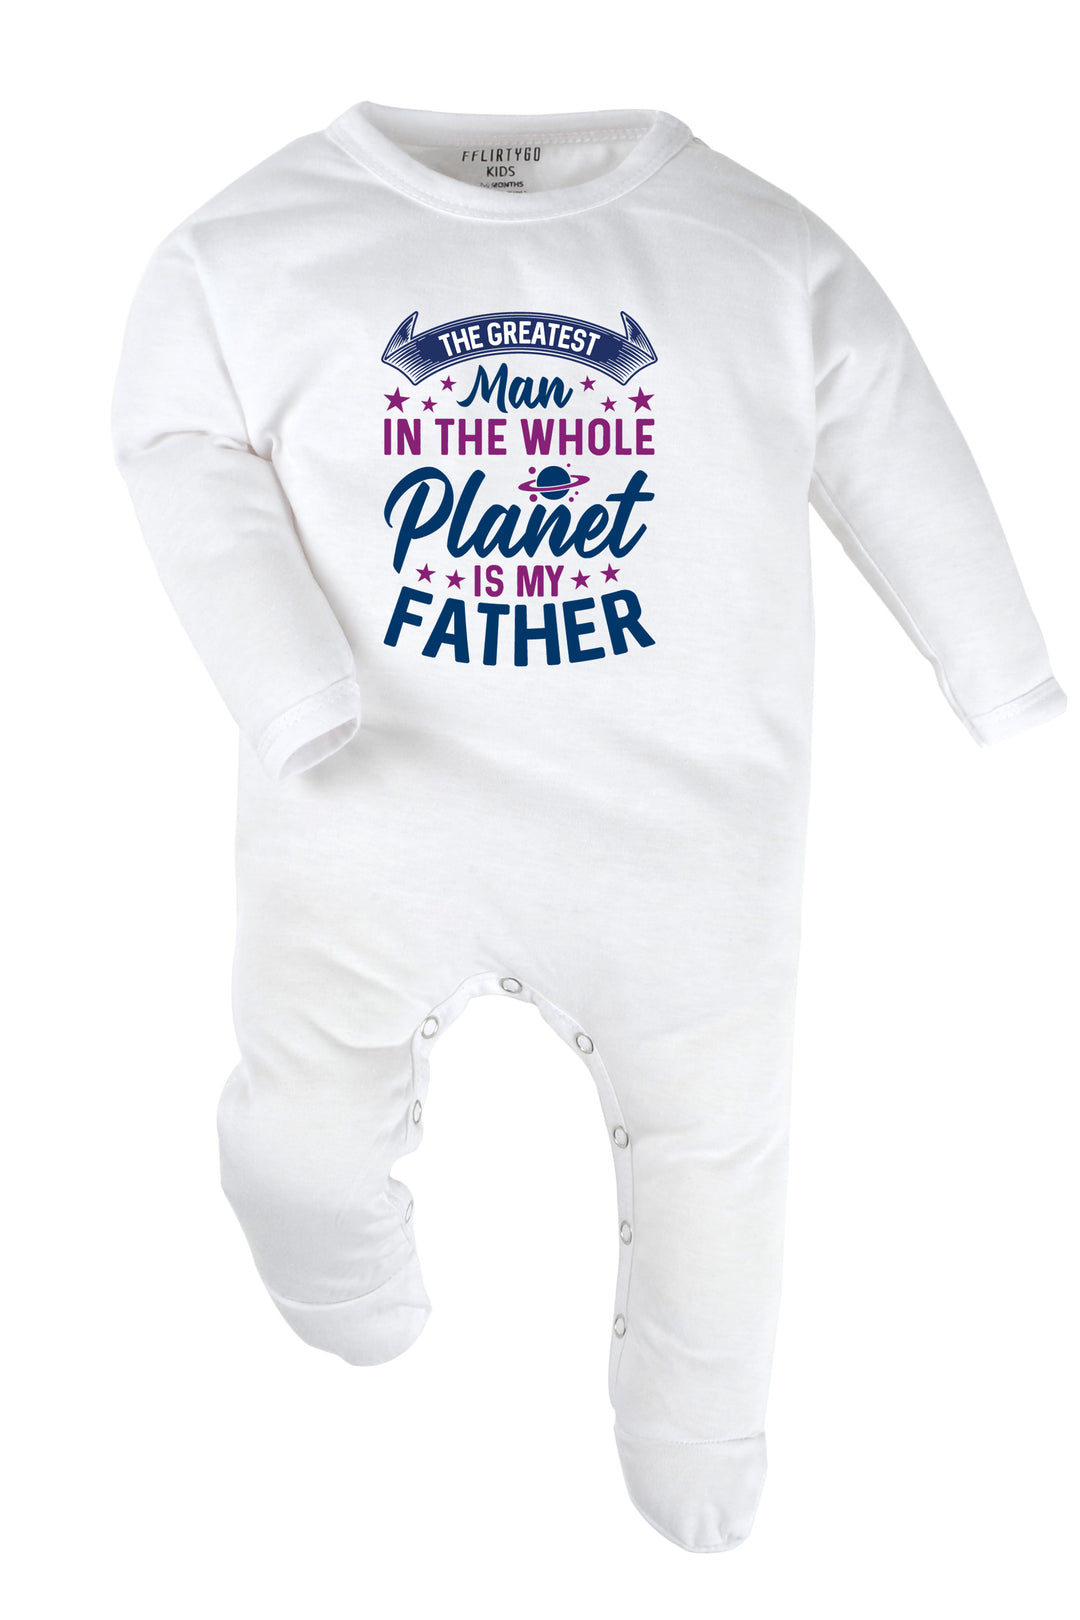 The Greatest Man In The Whole Planet Is My Father Baby Romper | Onesies